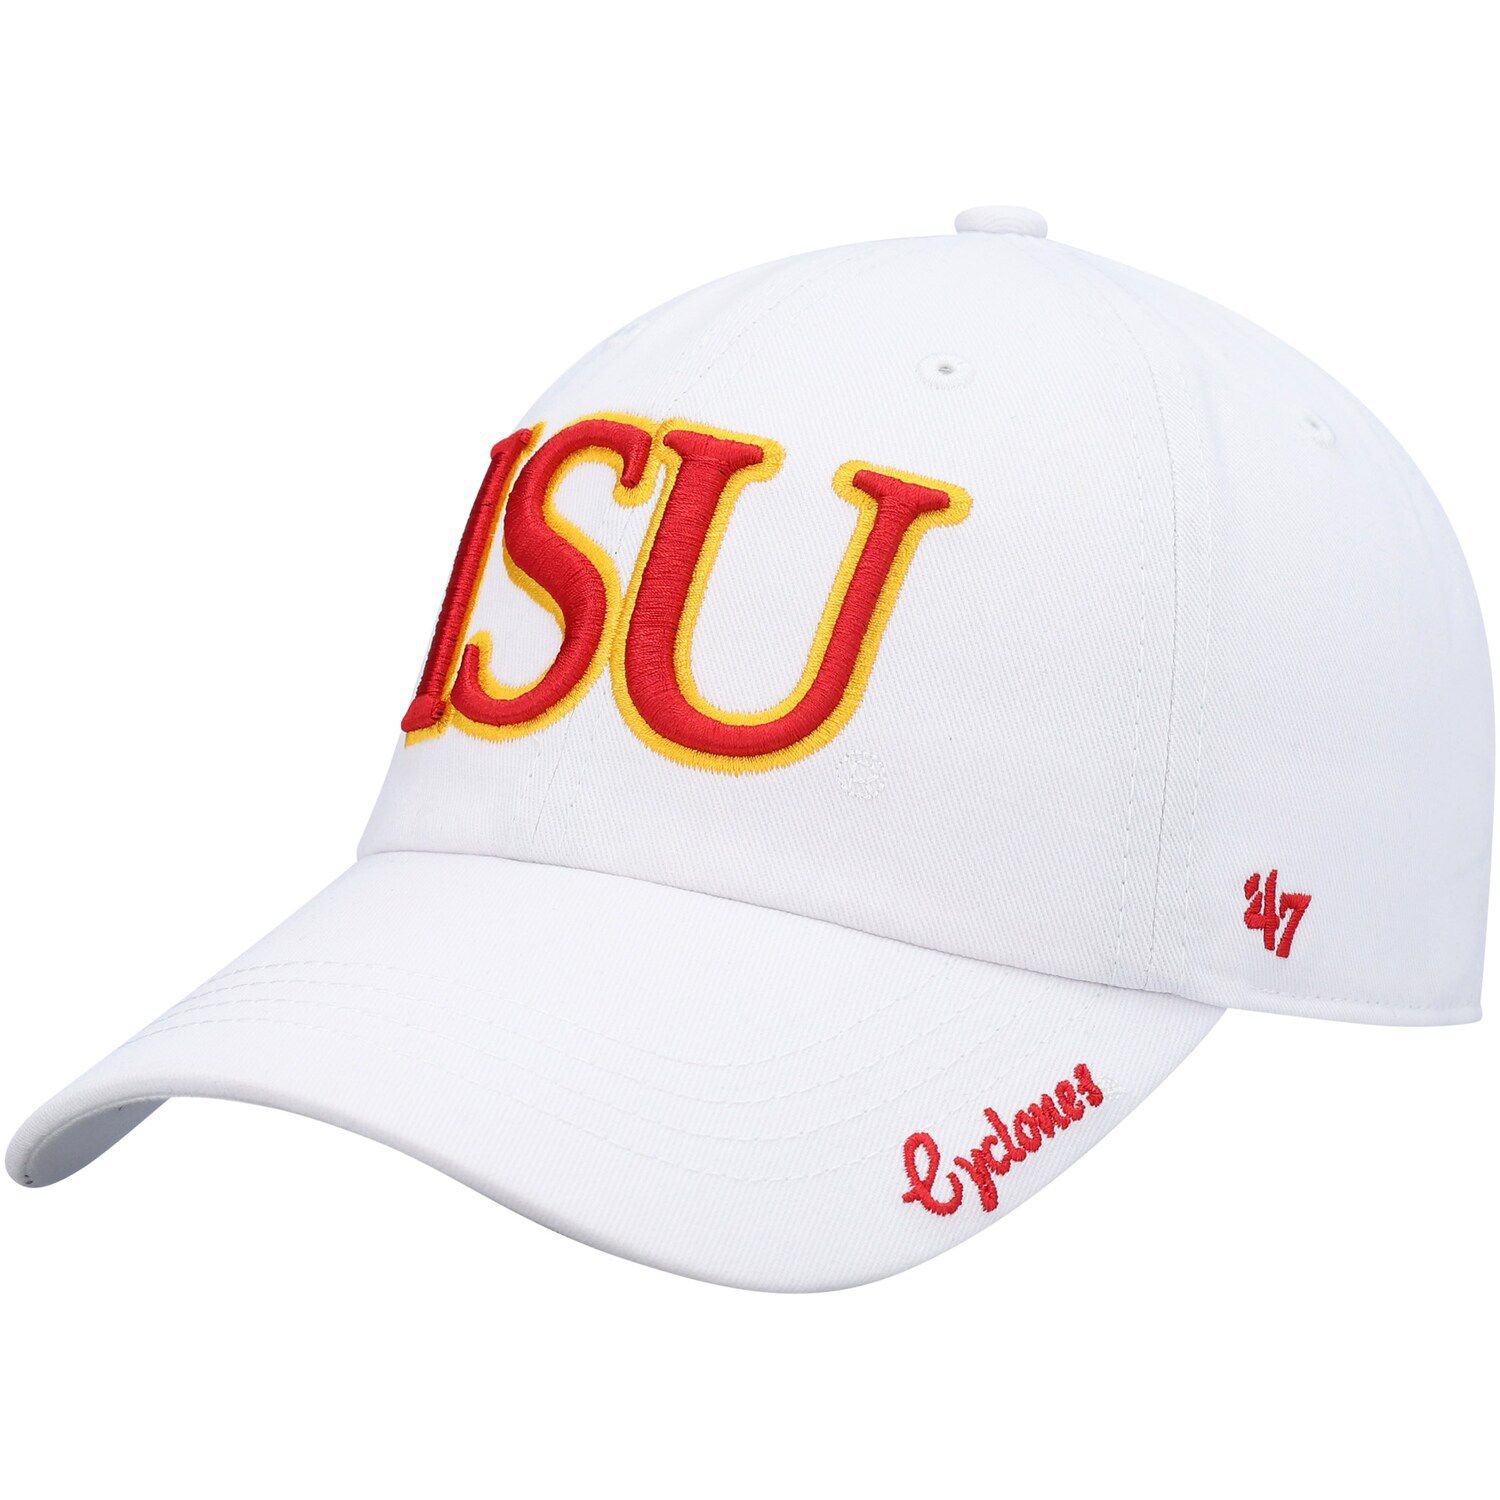 Image for Unbranded Women's '47 White Iowa State Cyclones Miata Clean Up Adjustable Hat at Kohl's.